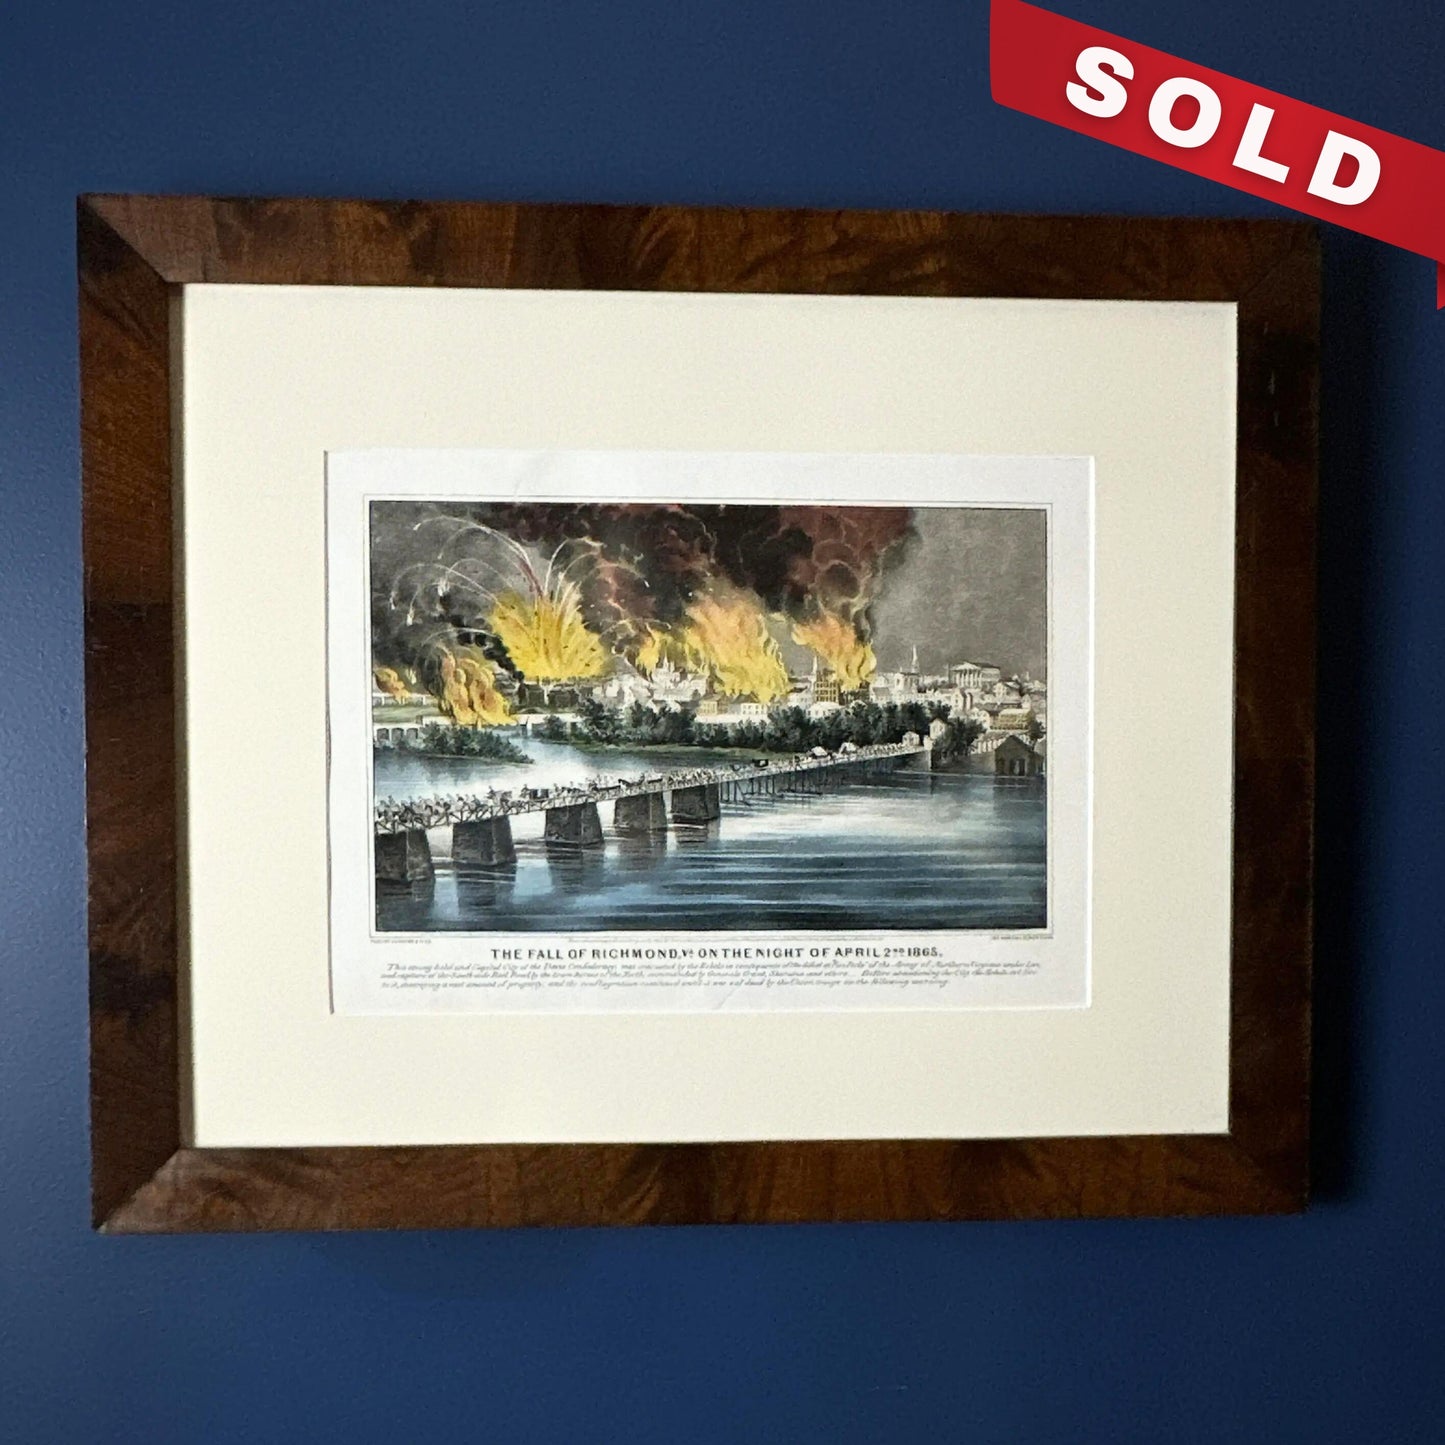 Currier & Ives hand-colored original print, "The Fall of Richmond, Virginia, on the Night of April 2nd, 1865," in an antique frame